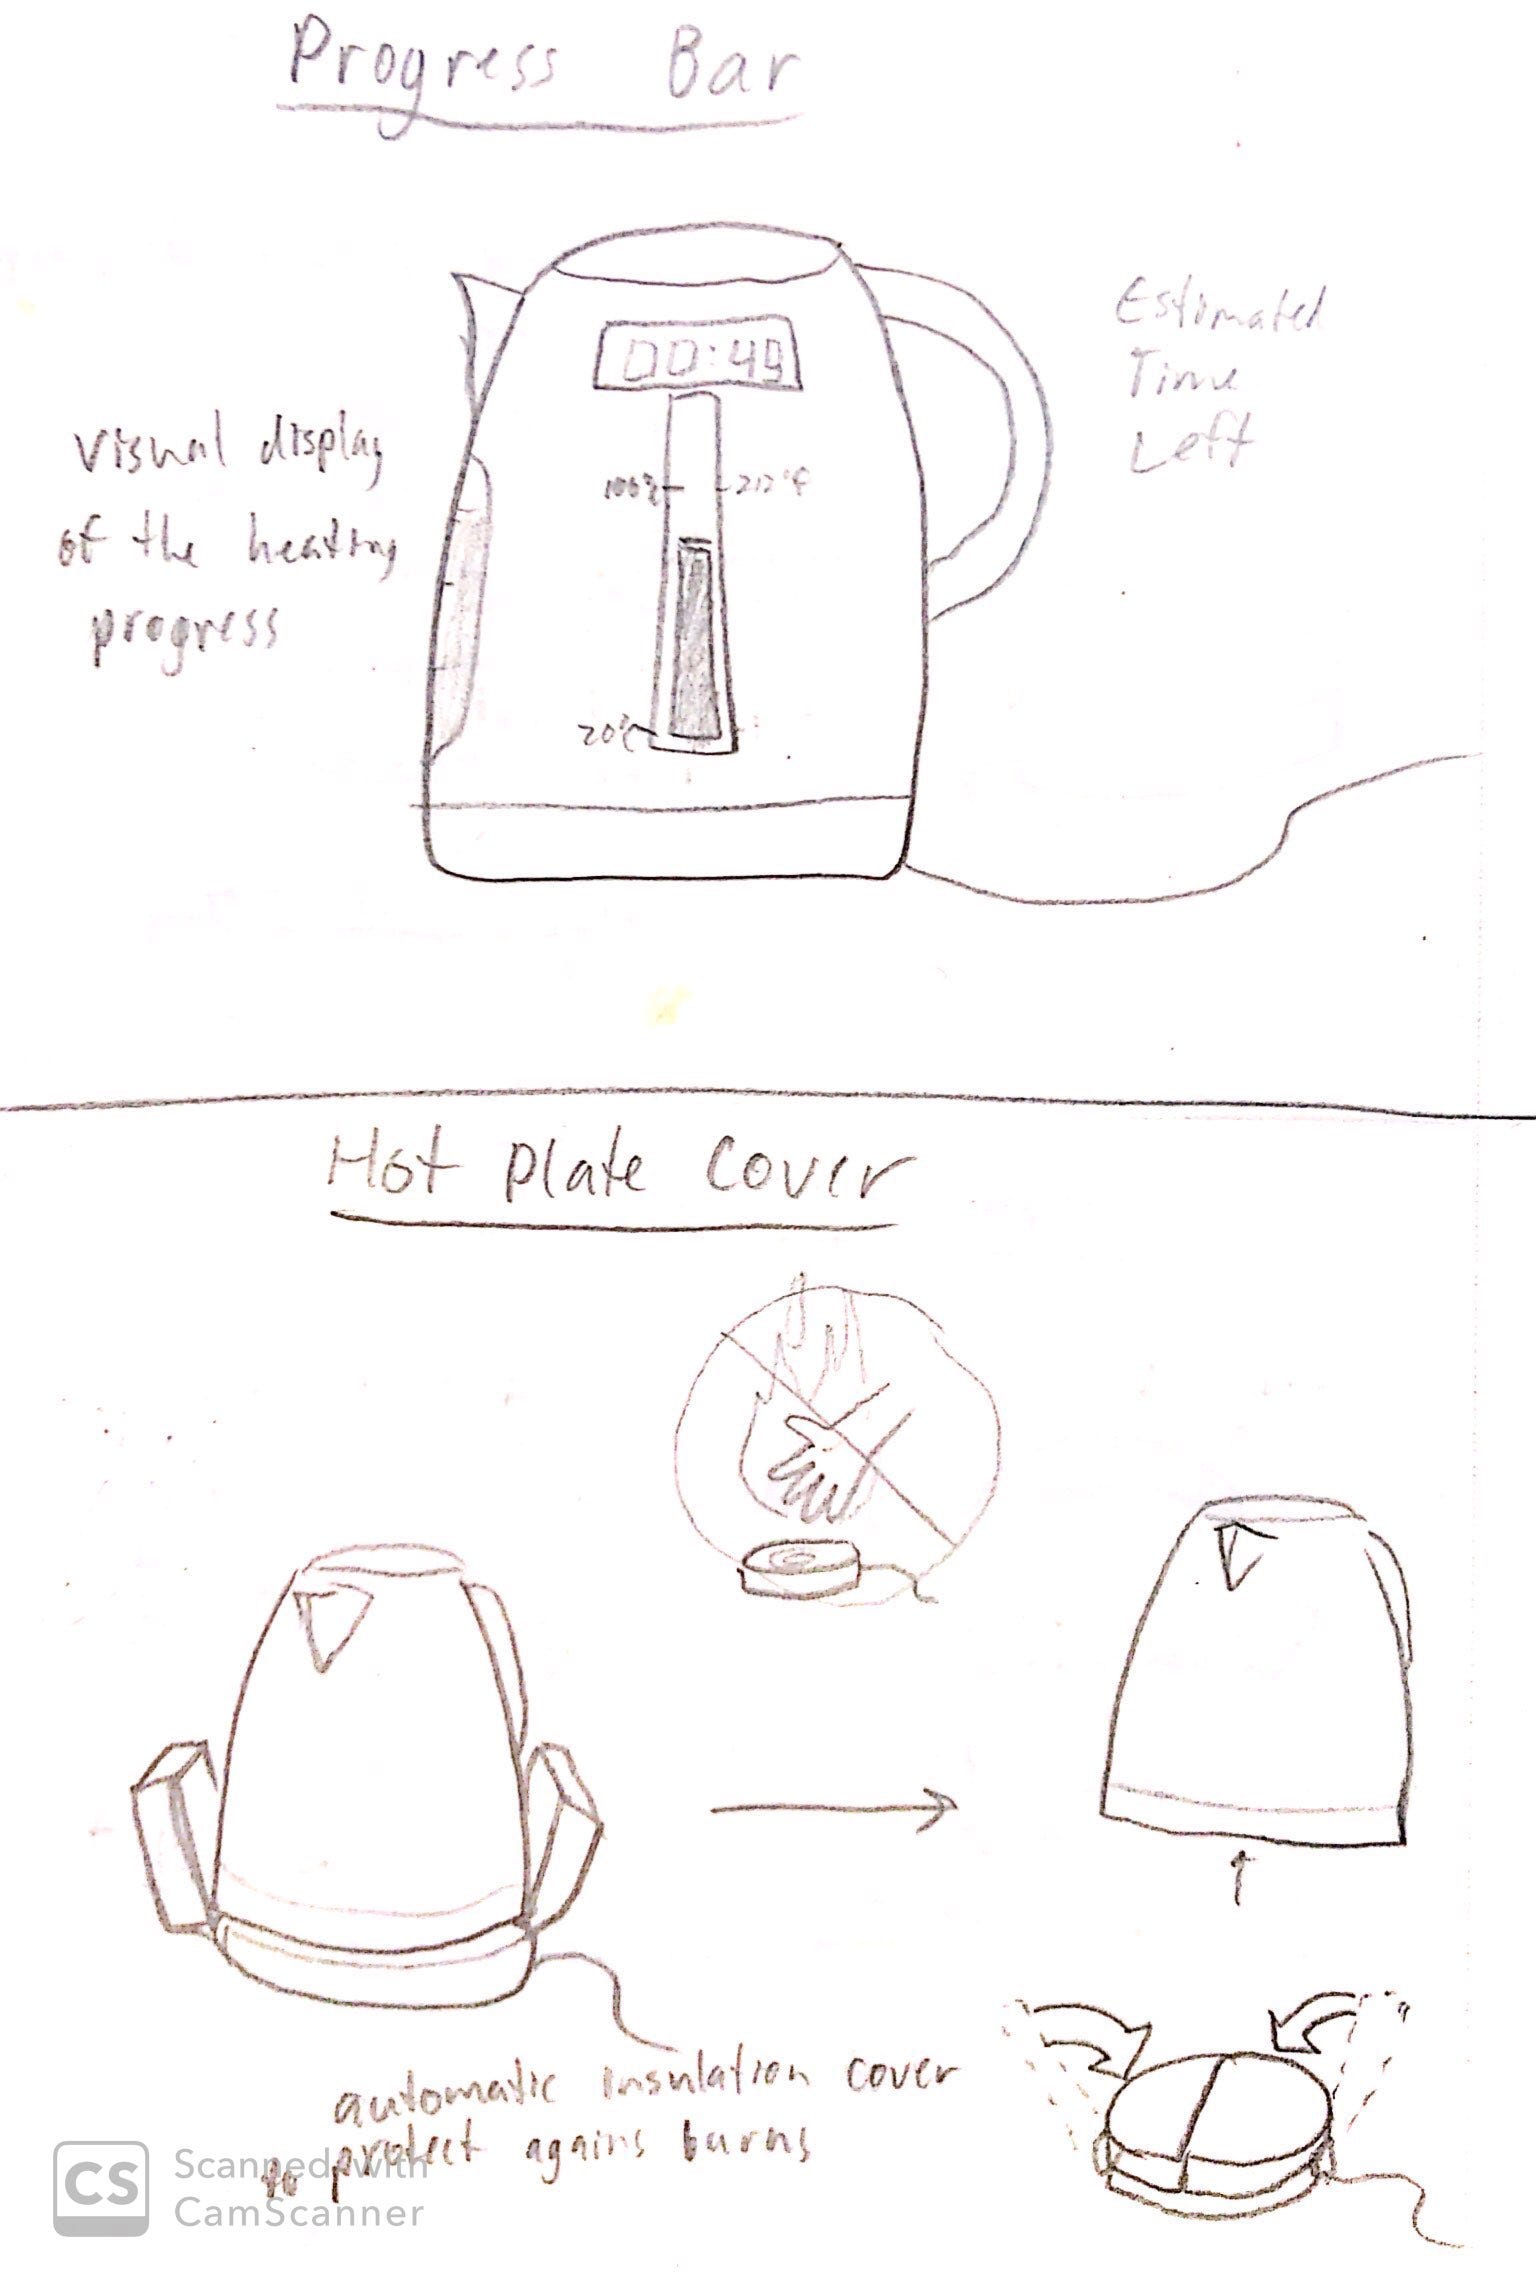 How do electric kettles work? - Explain that Stuff by ishmam - Issuu